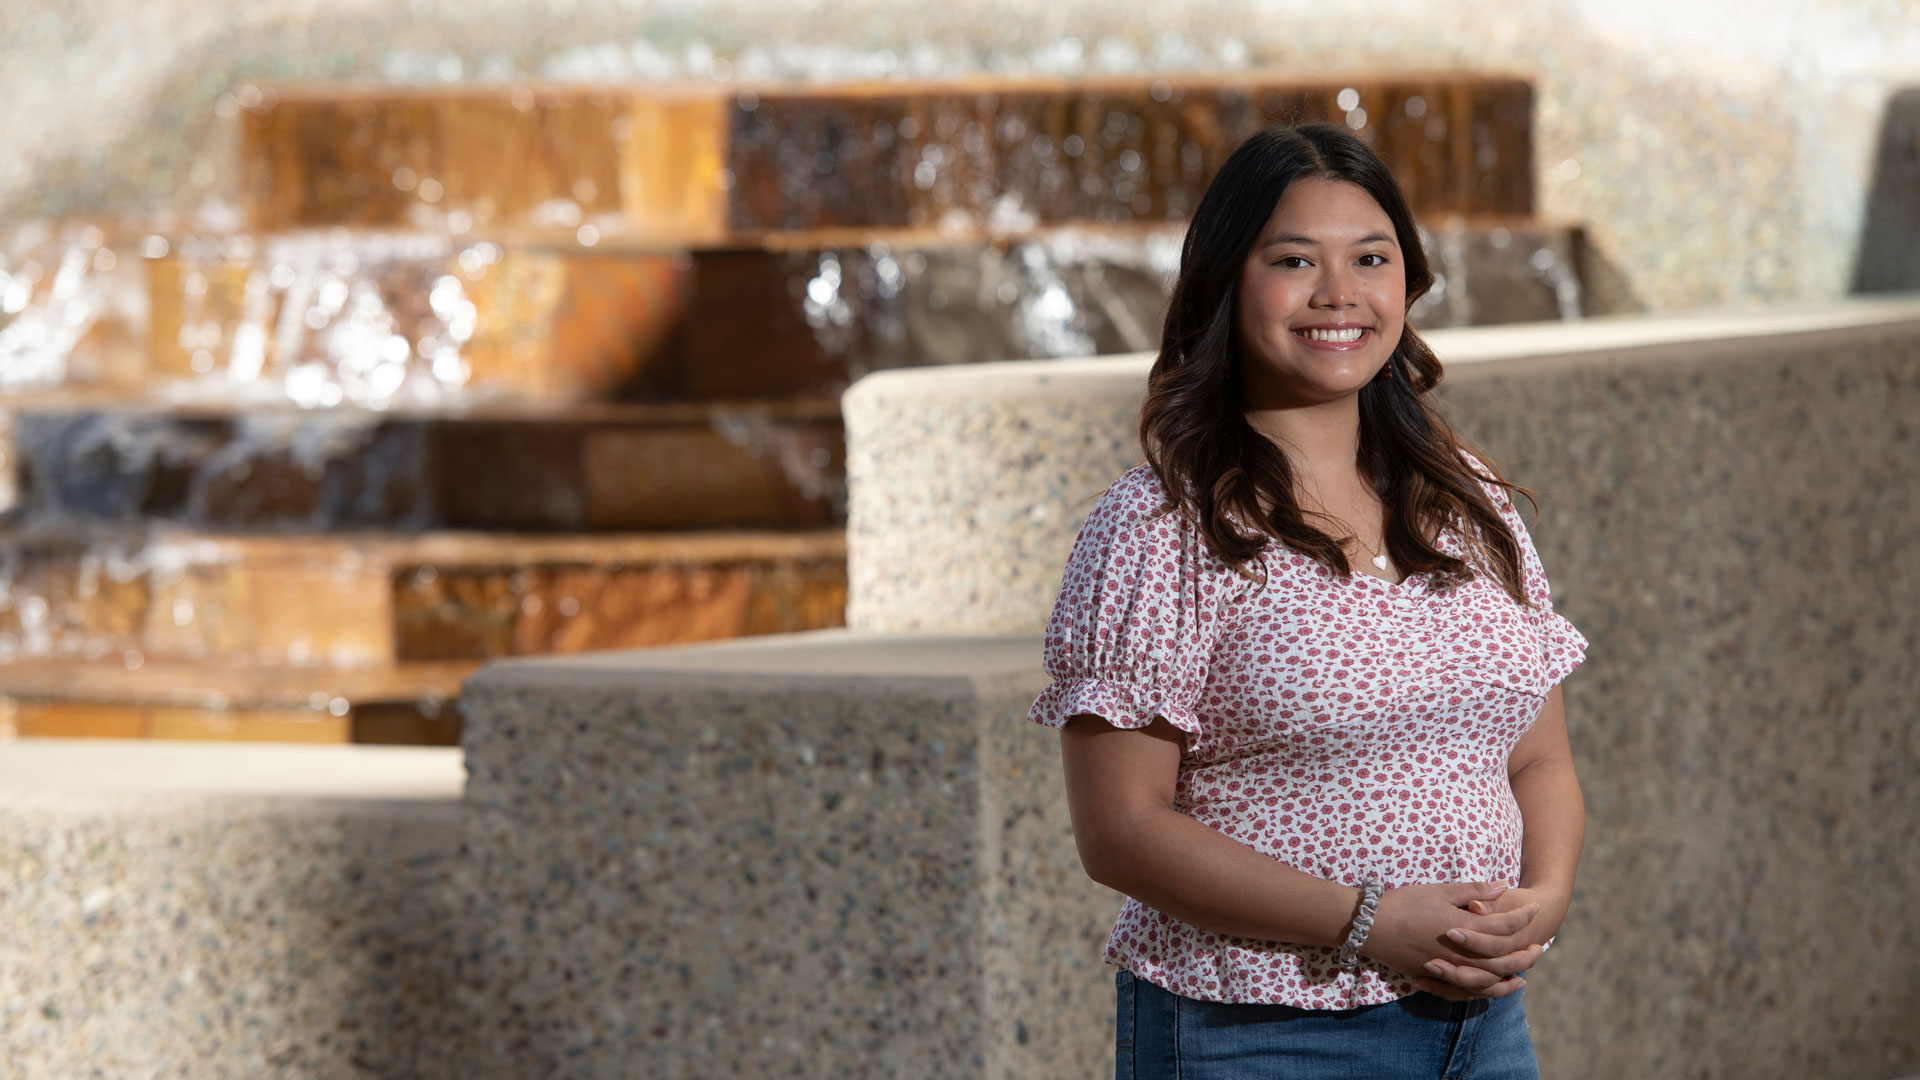 Leighani Sablan, a UC Irvine senior, is co-president of the campus’s Pacific Islander Student Assoc